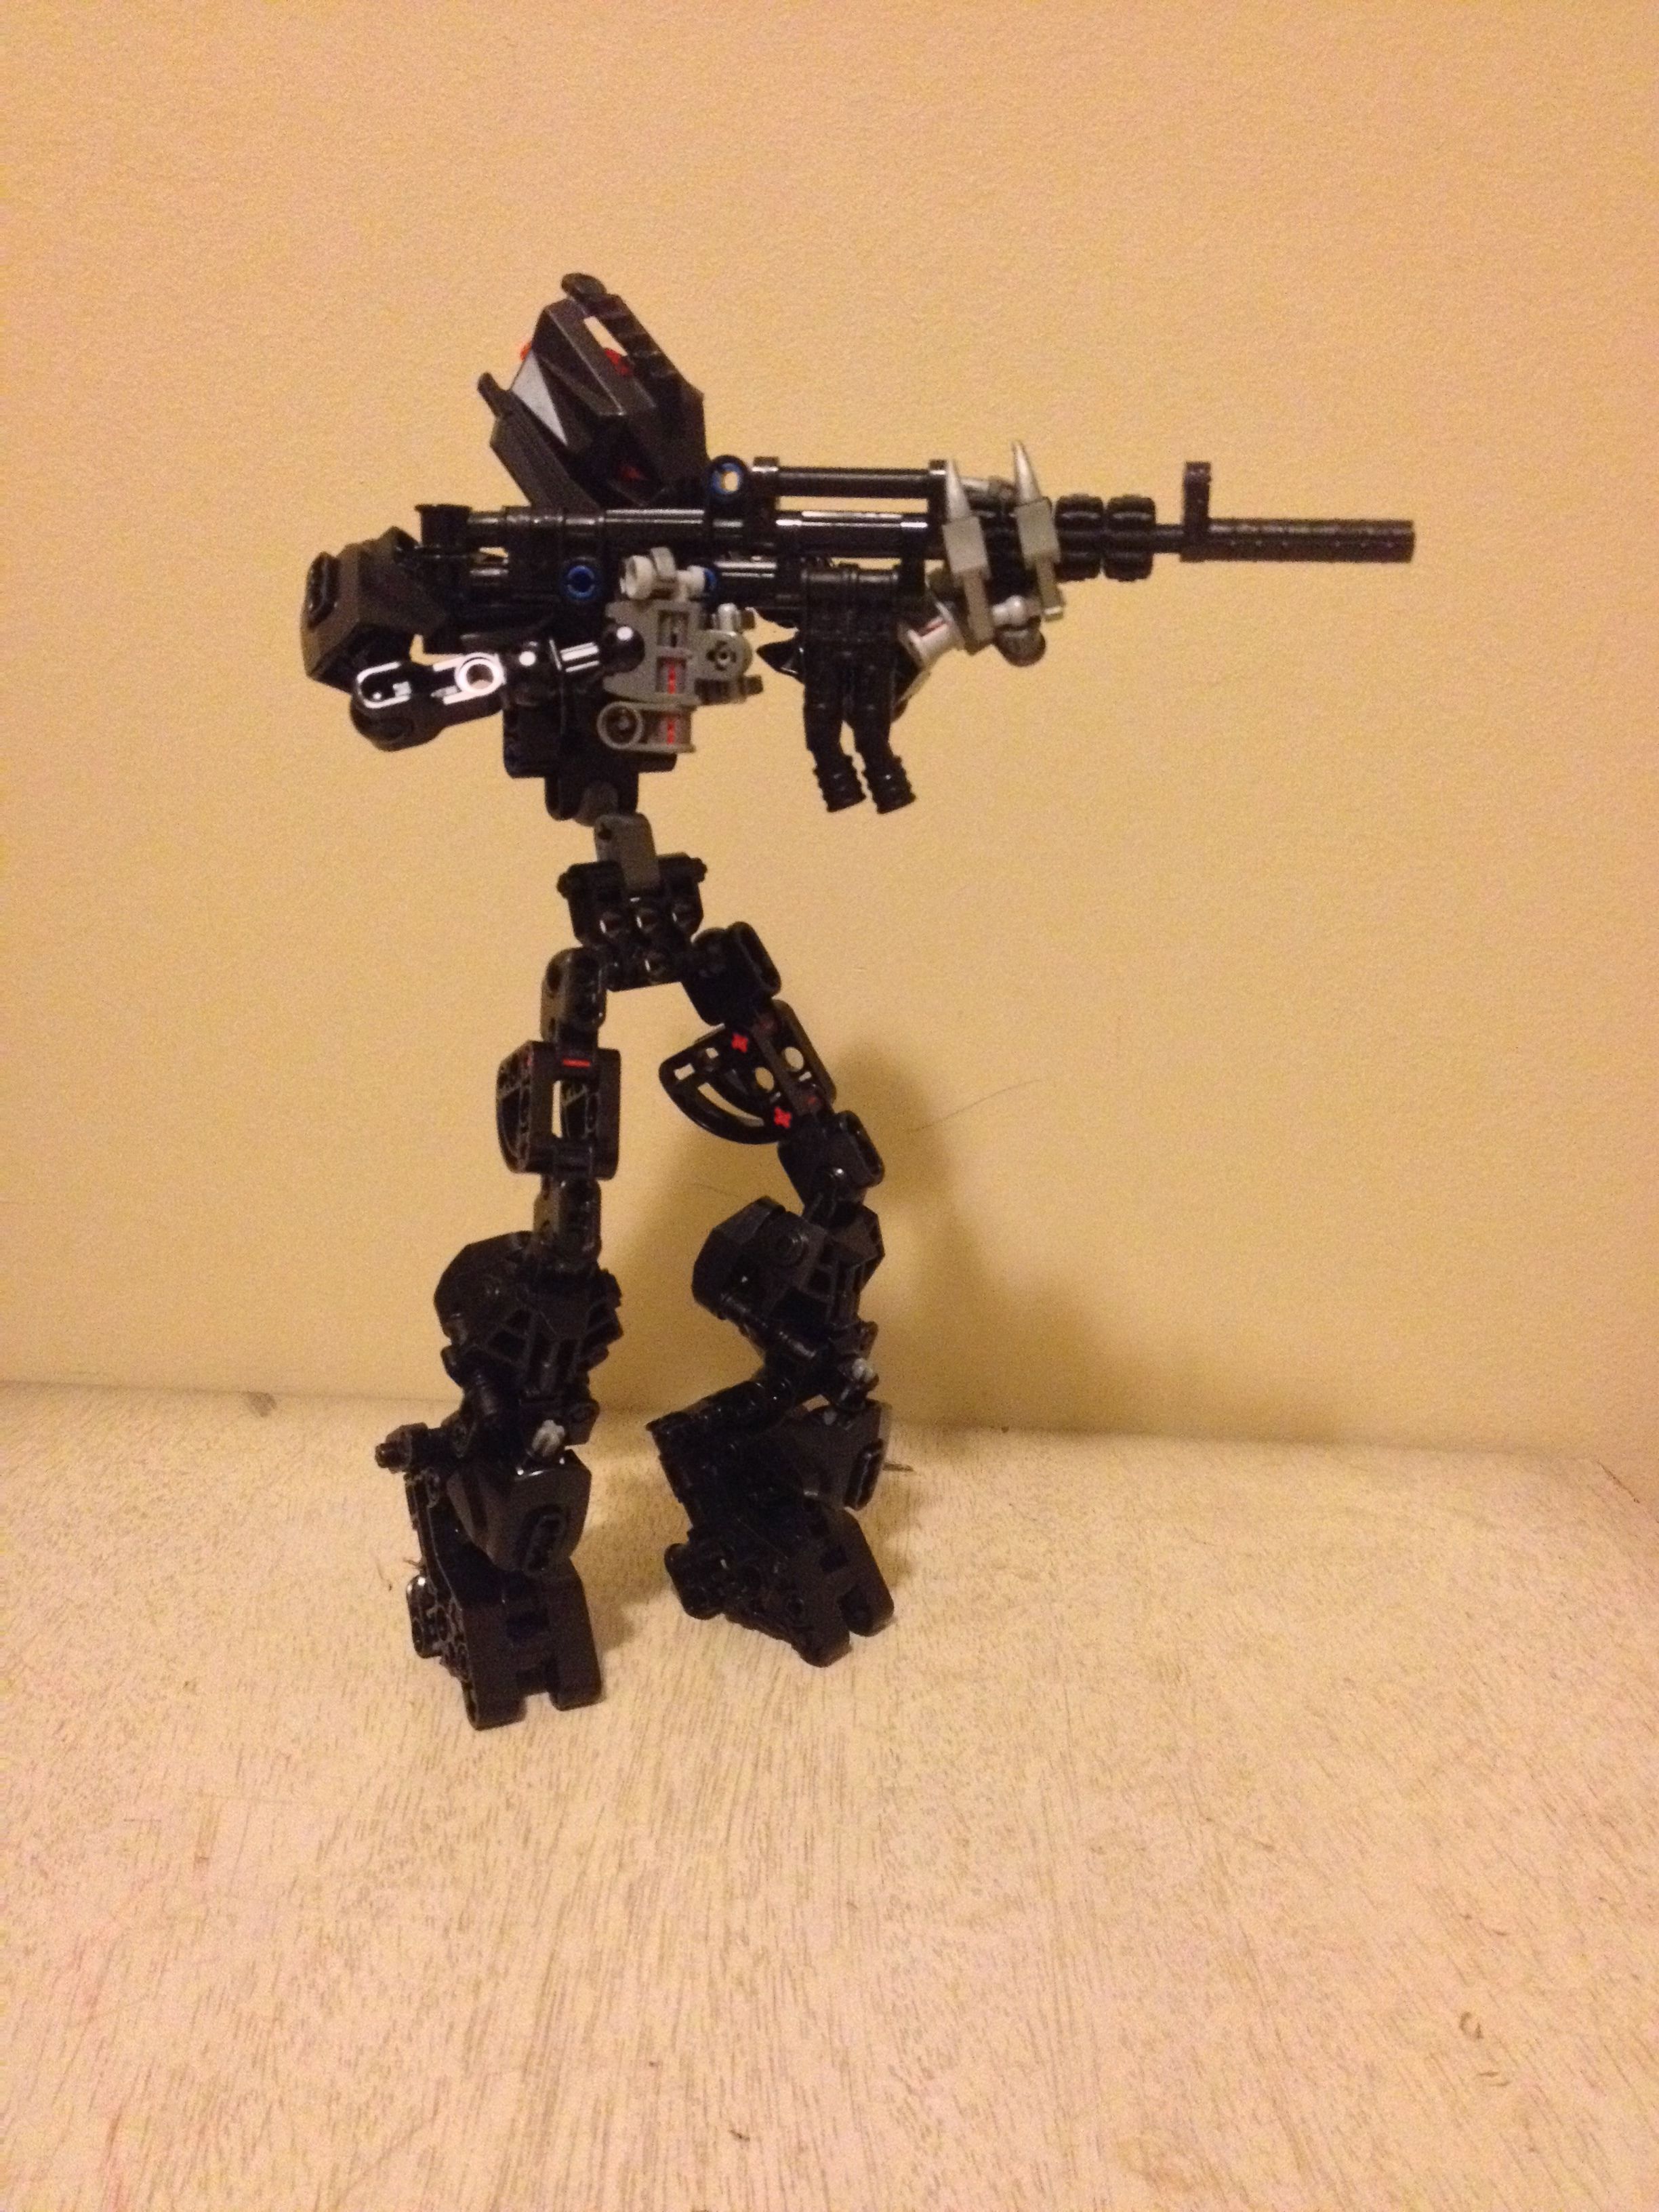 Bionicle Guns - Lego Creations - The TTV Message Boards